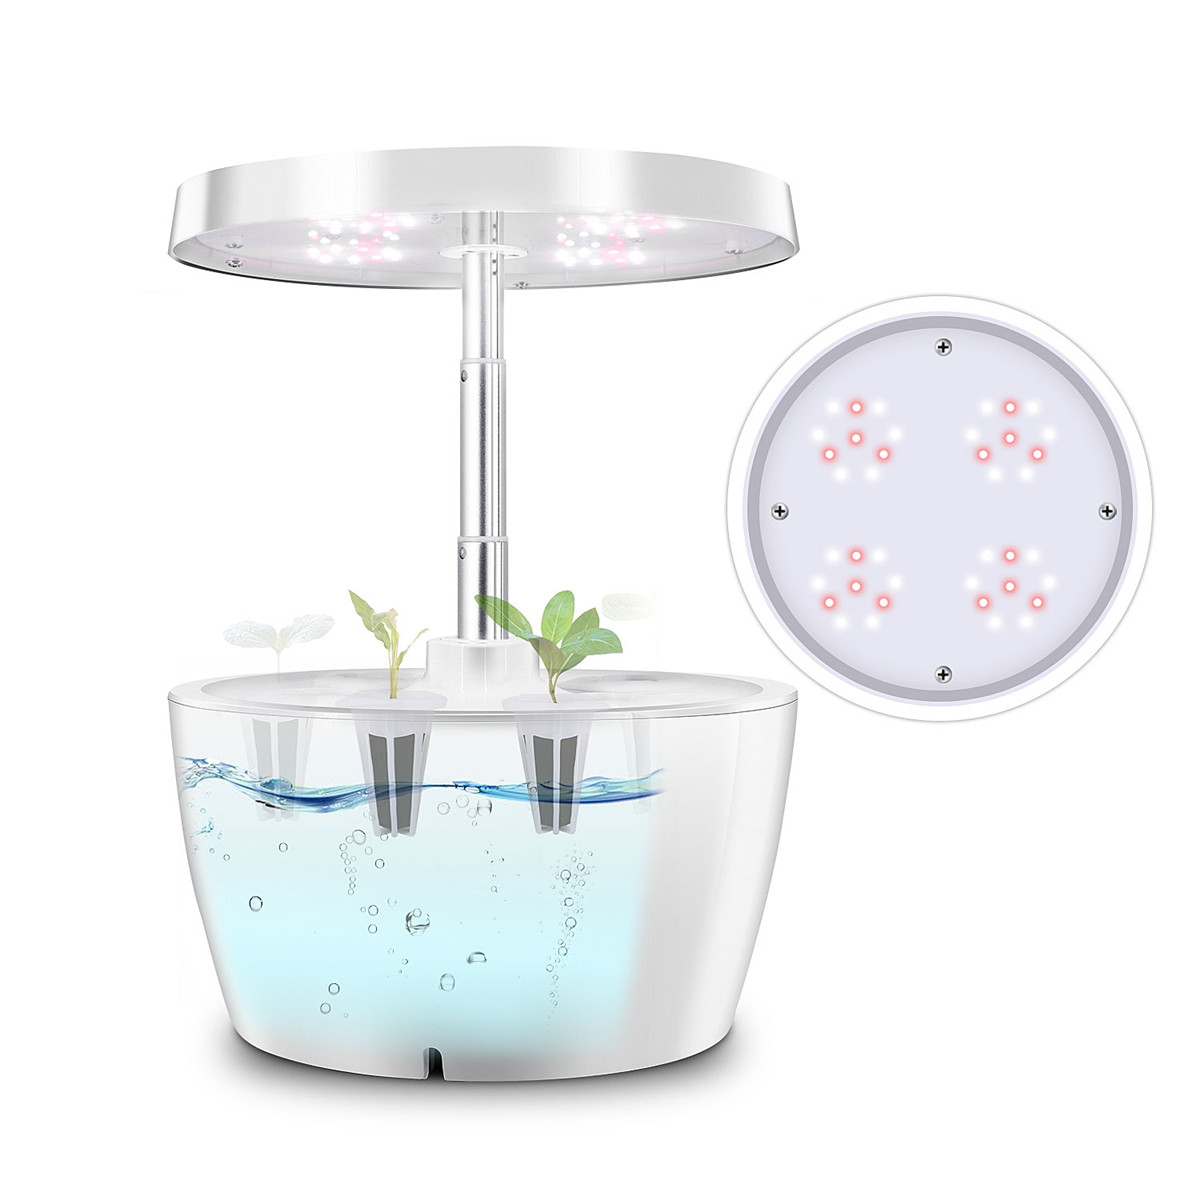 Ecoo Grower Hydroponics System Intelligent Box with Grow Light Indoor Home Garden Nursery Pots Educational Toys for Children